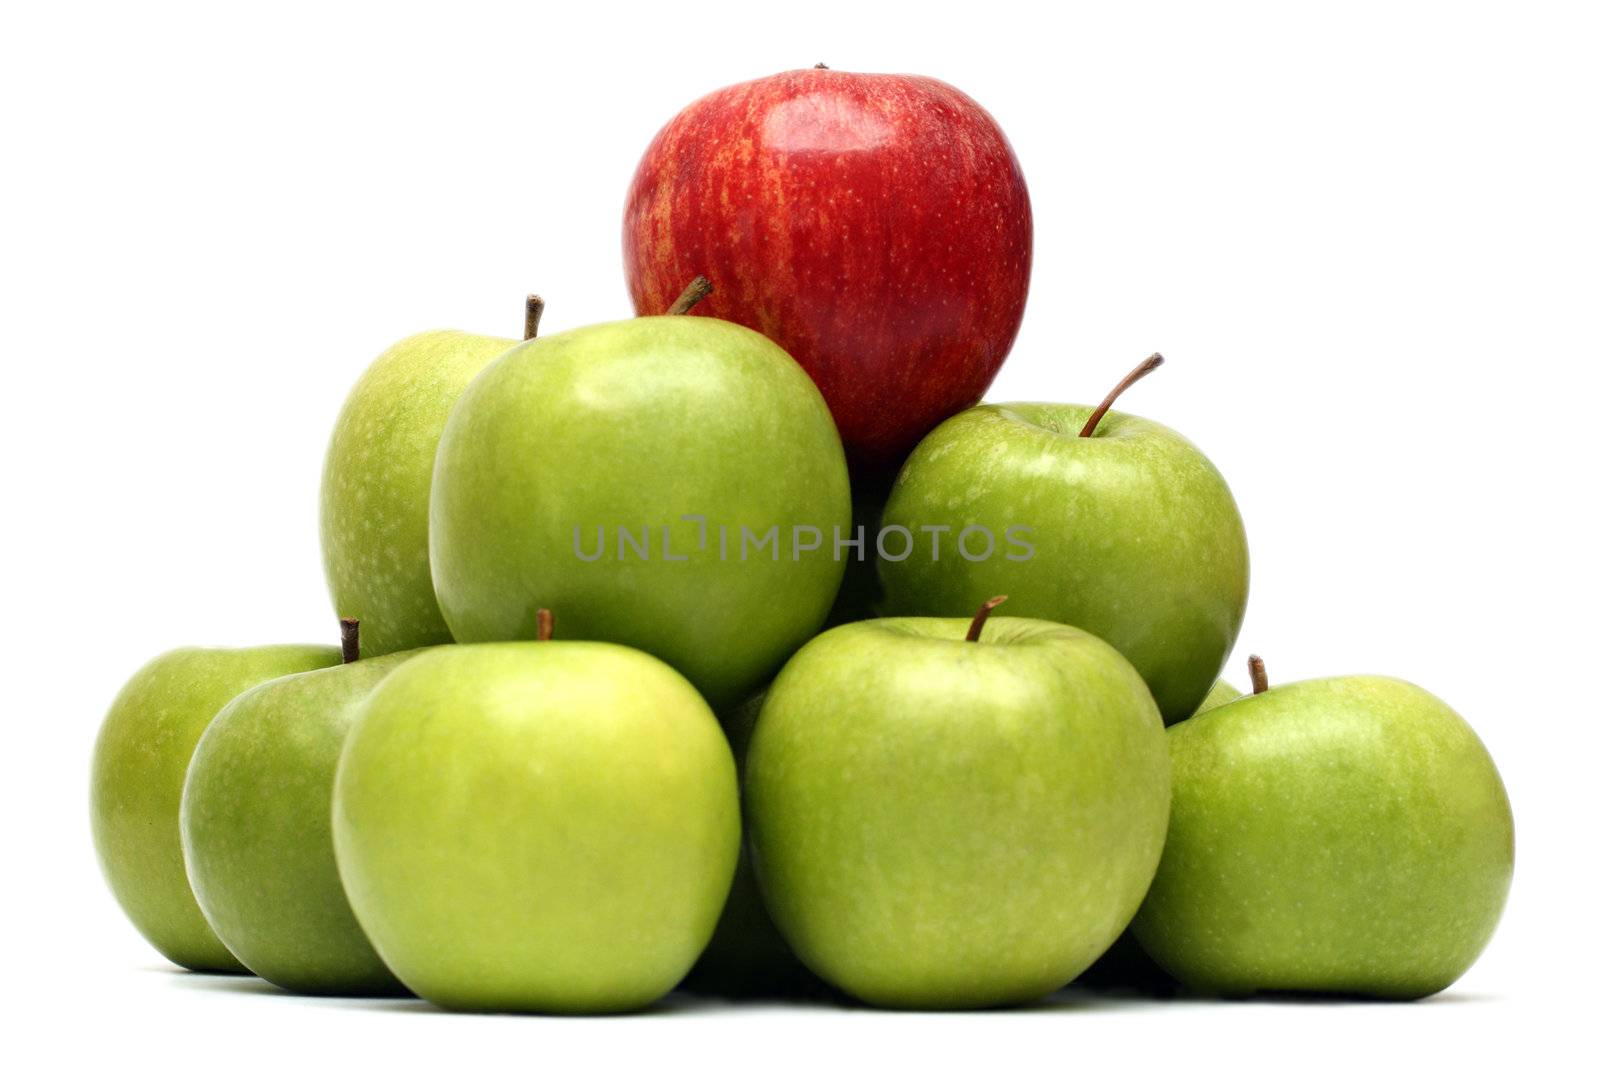 domination concepts - red apple between green apples